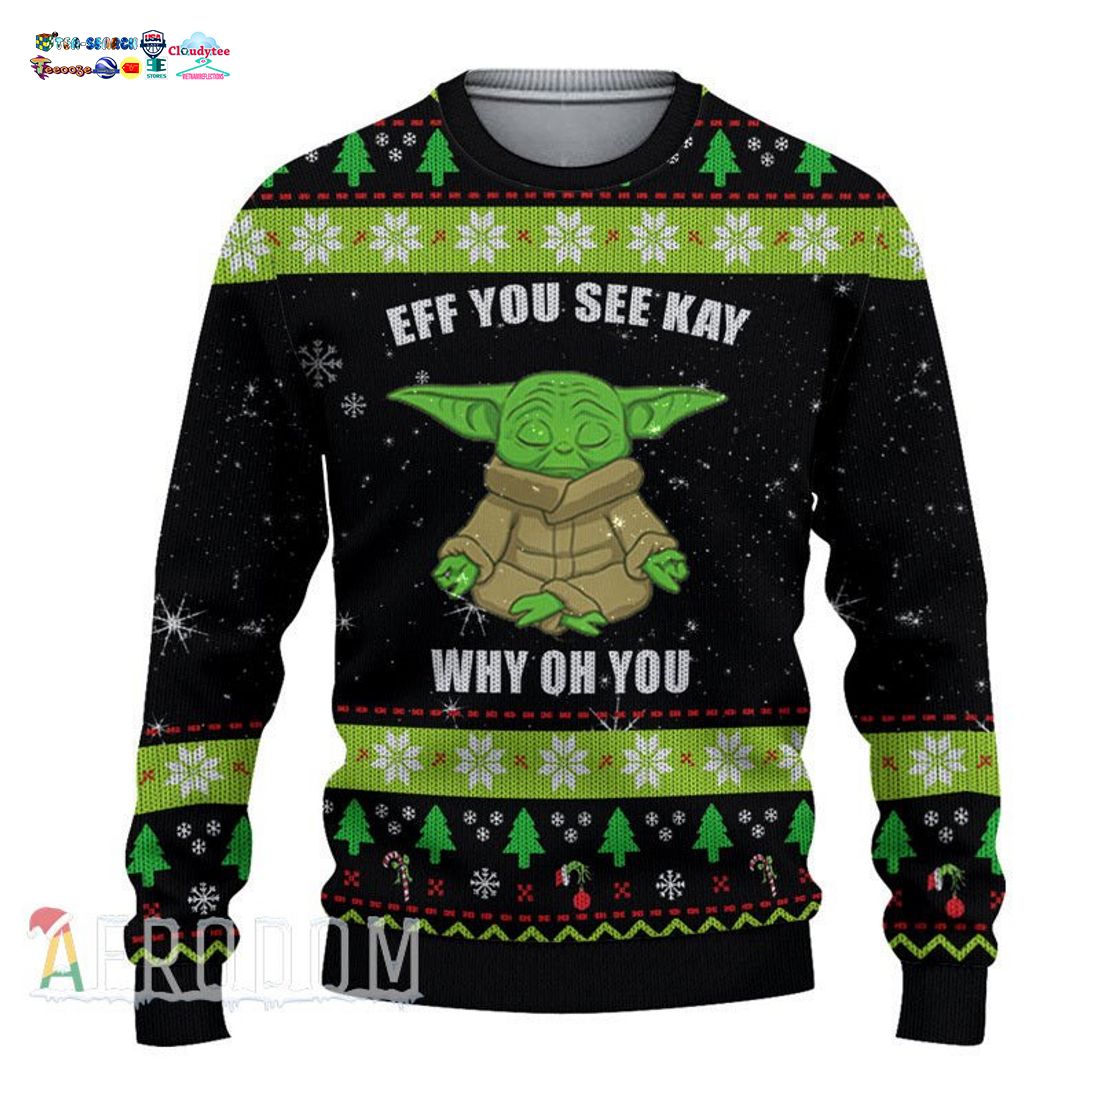 Baby Yoda Eff You See Kay Why Oh You Ugly Christmas Sweater